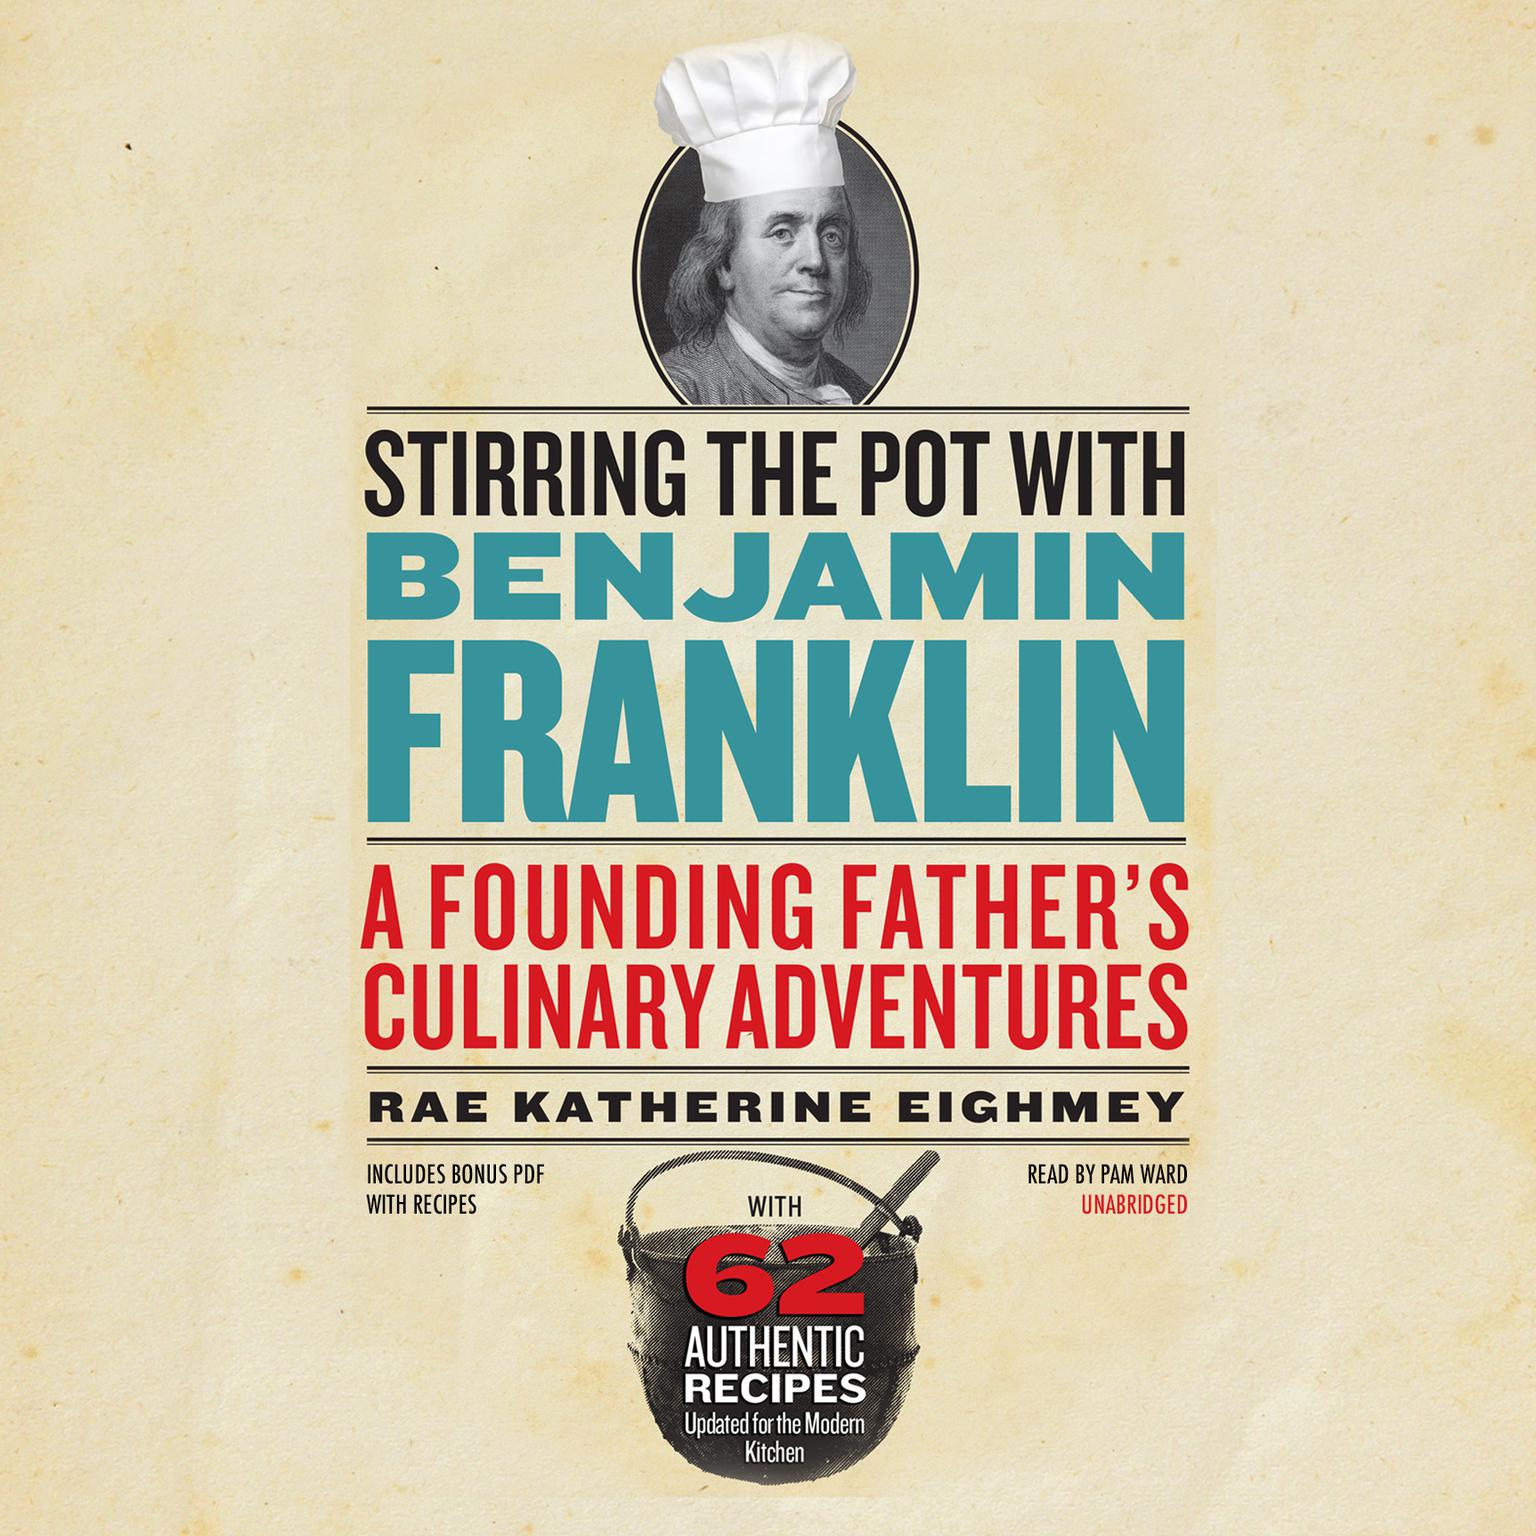 Stirring the Pot with Benjamin Franklin: A Founding Father’s Culinary Adventures Audiobook, by Rae Katherine Eighmey